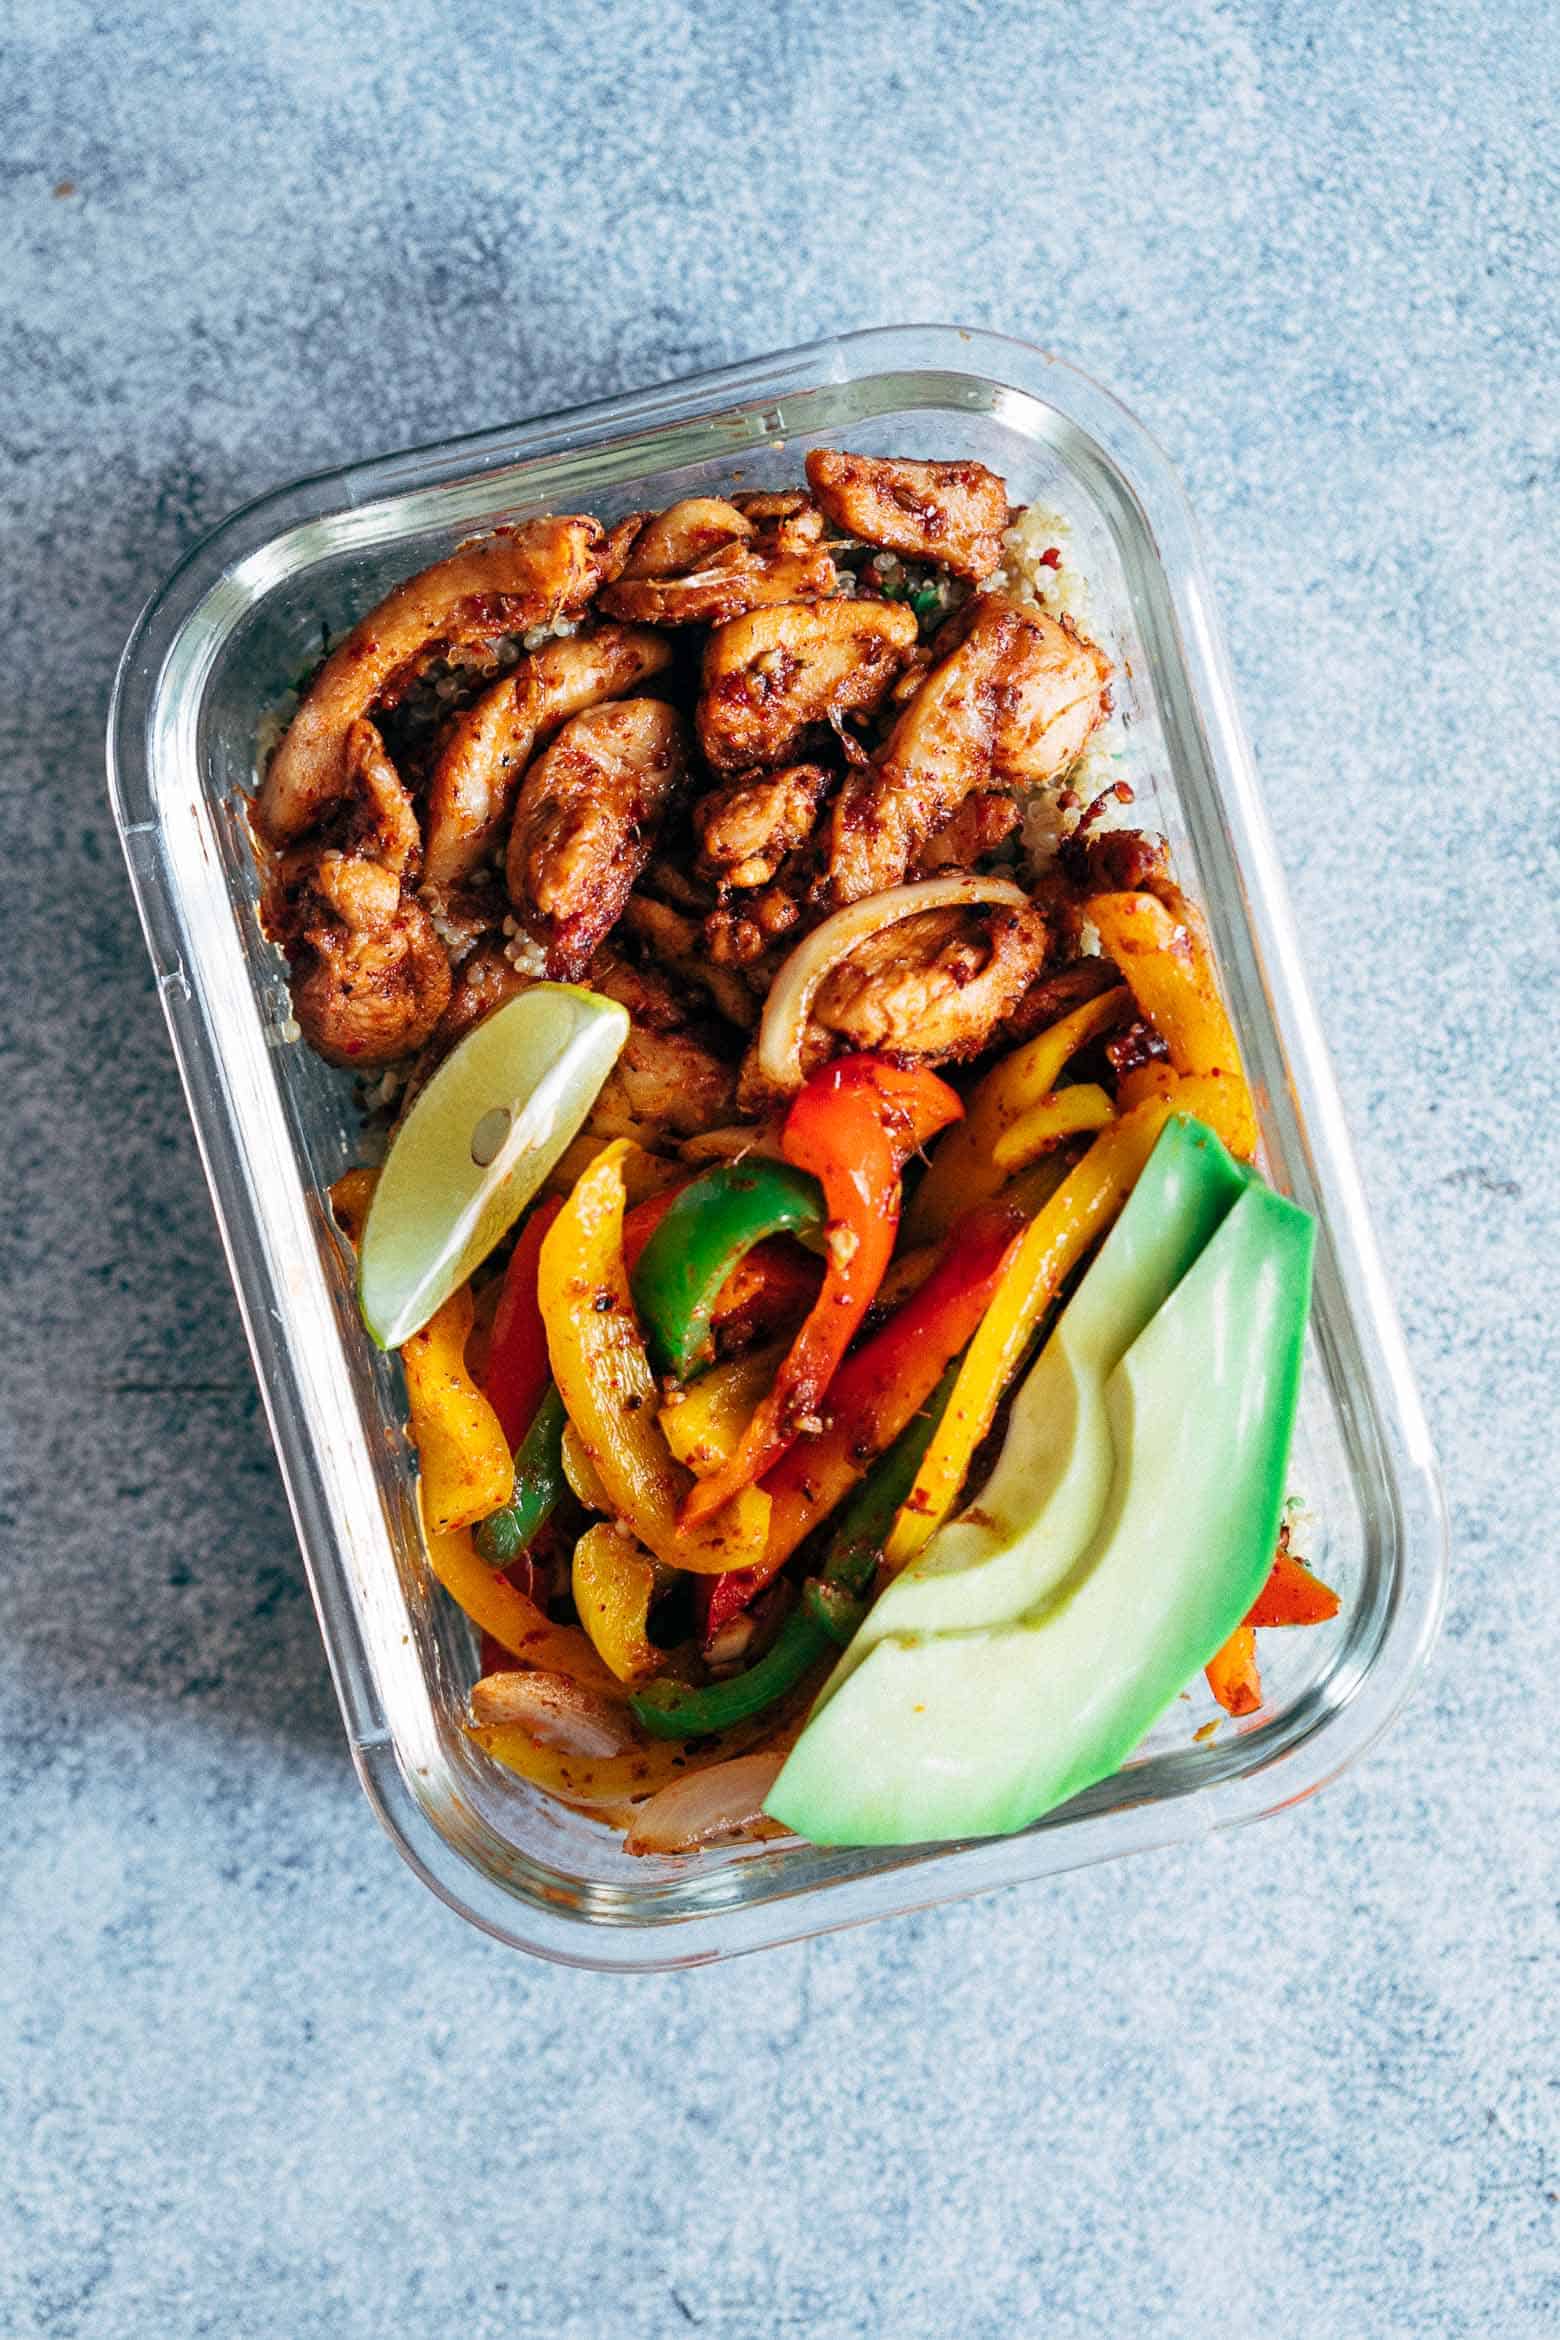 Chicken Fajita Meal Prep Lunch Bowls are teamed with cilantro lime quinoa and is a healthy, tasty, fast recipe to make lunch prep for weekdays super easy!